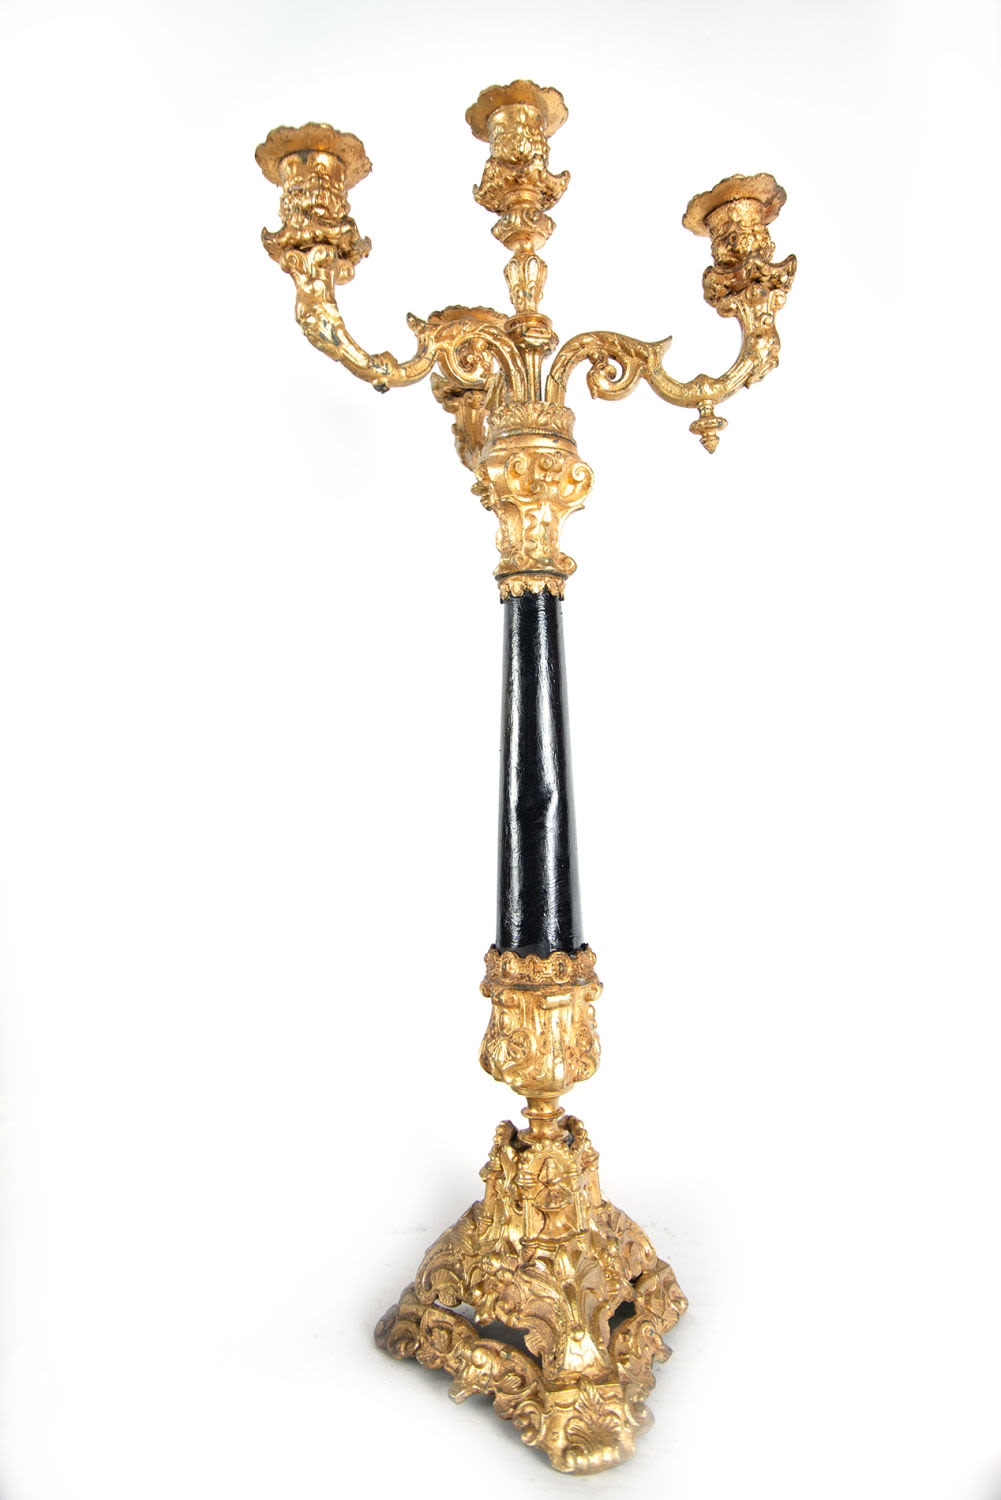 Napoleon III garniture depicting the Angel Gabriel with two candlesticks, second half of the 19th ce - Image 10 of 11